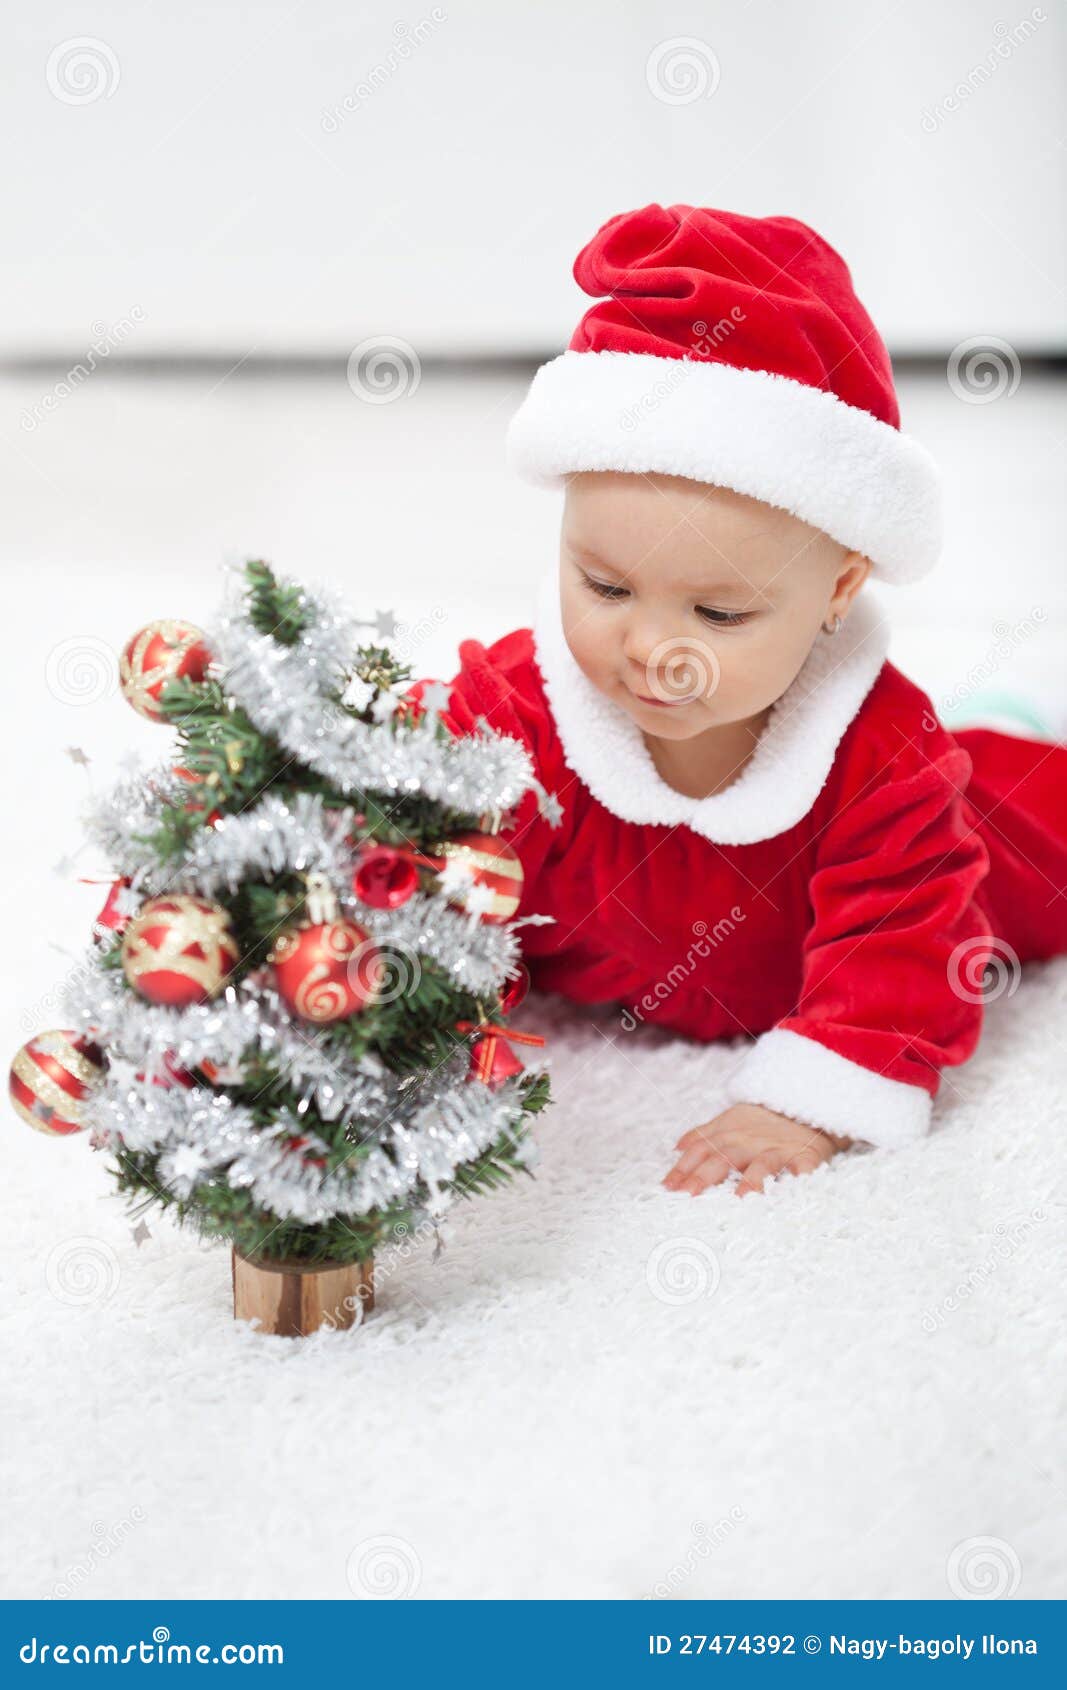 My first christmas stock photo. Image of girl, happy - 27474392